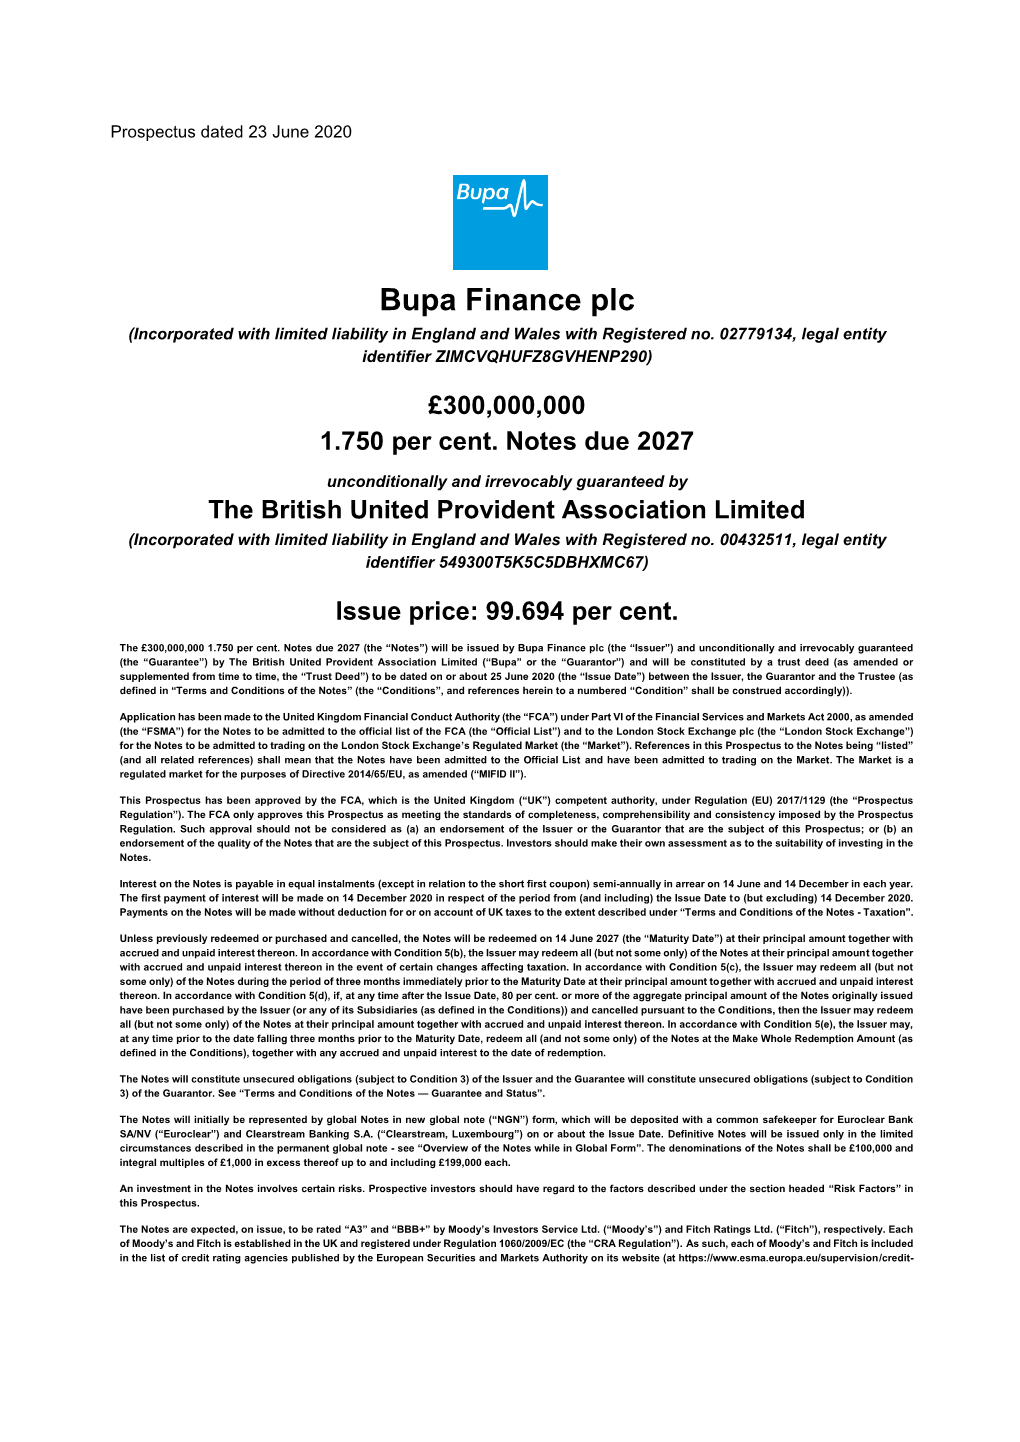 Bupa Finance Plc (Incorporated with Limited Liability in England and Wales with Registered No